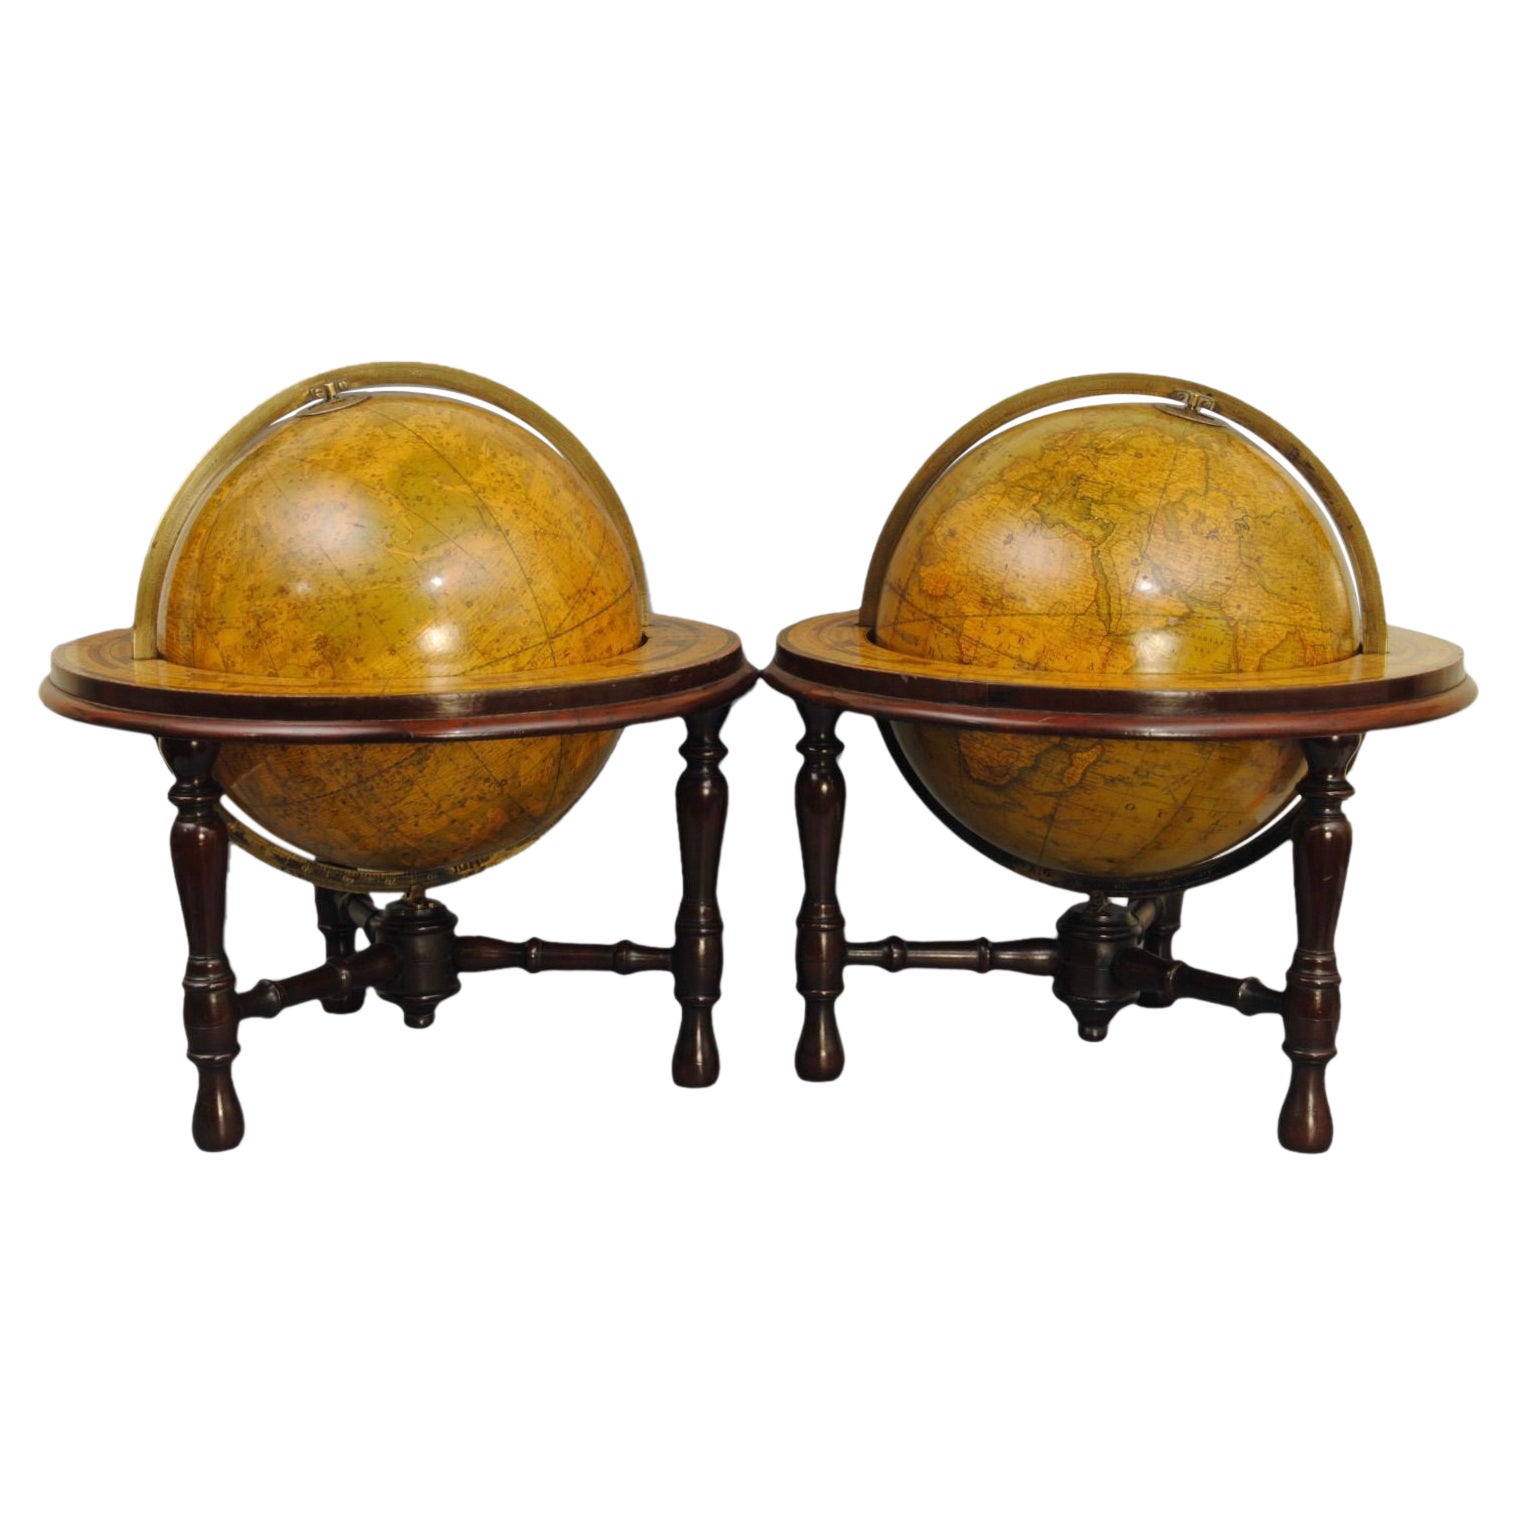 Pair of 19th Century Table Globes by Crunchley For Sale